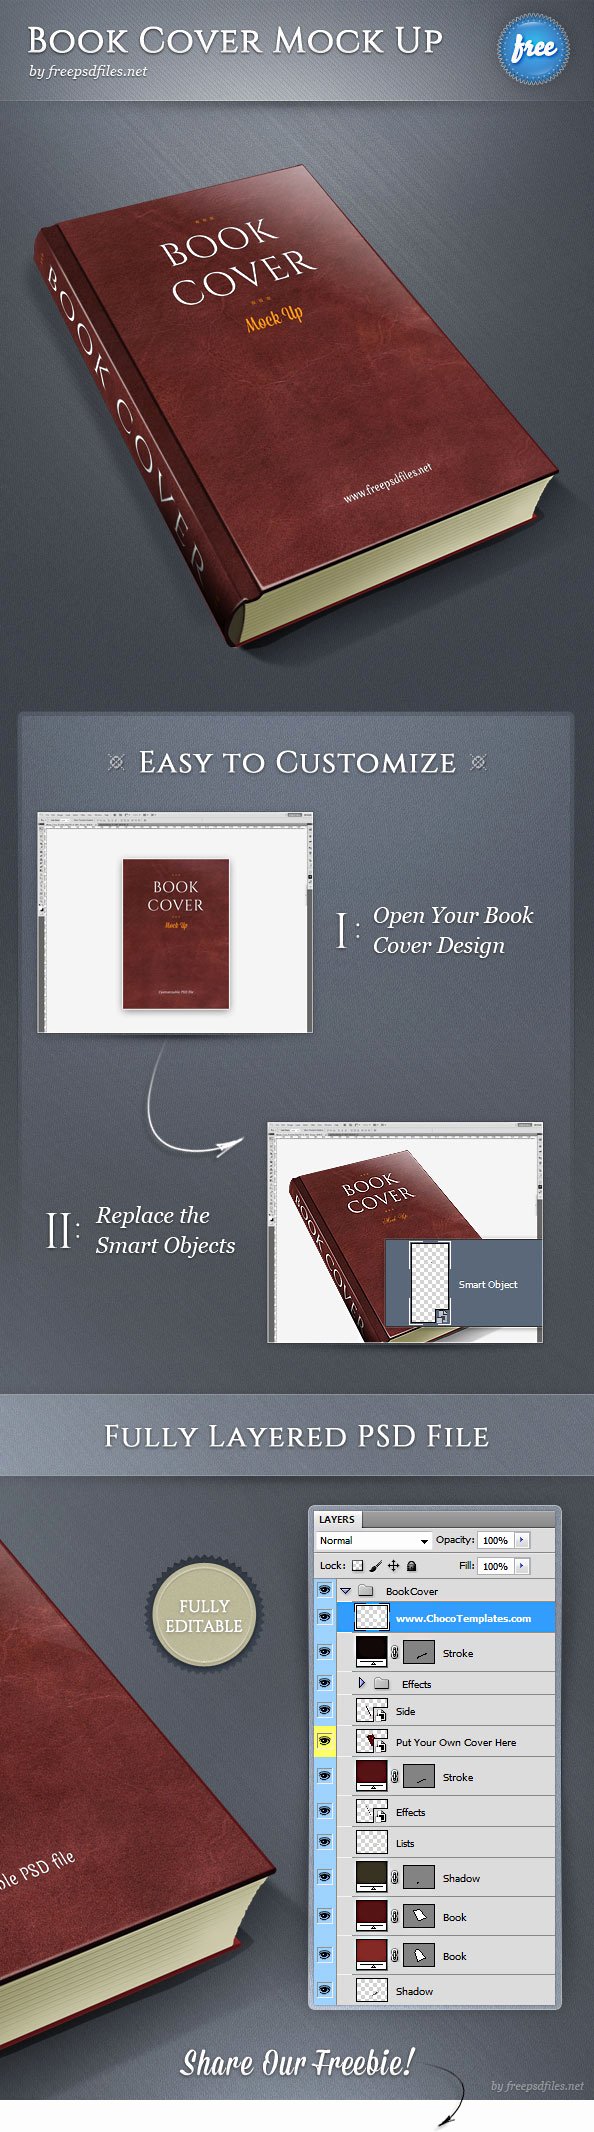 Book Cover Template Psd Fresh Book Cover Psd Mockup Free Psd Files